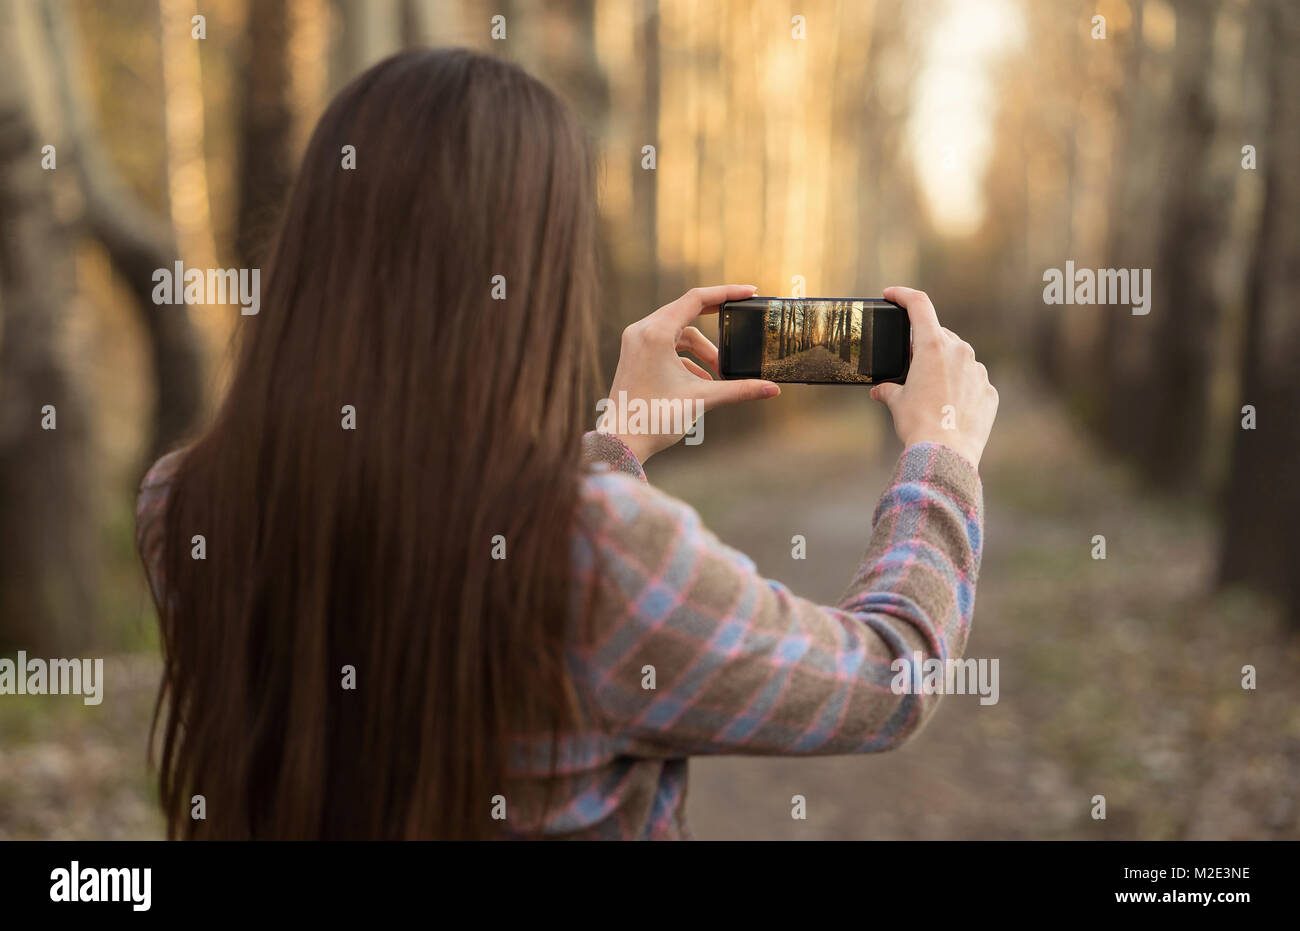 Caucasian woman photographing path with cell phone Banque D'Images